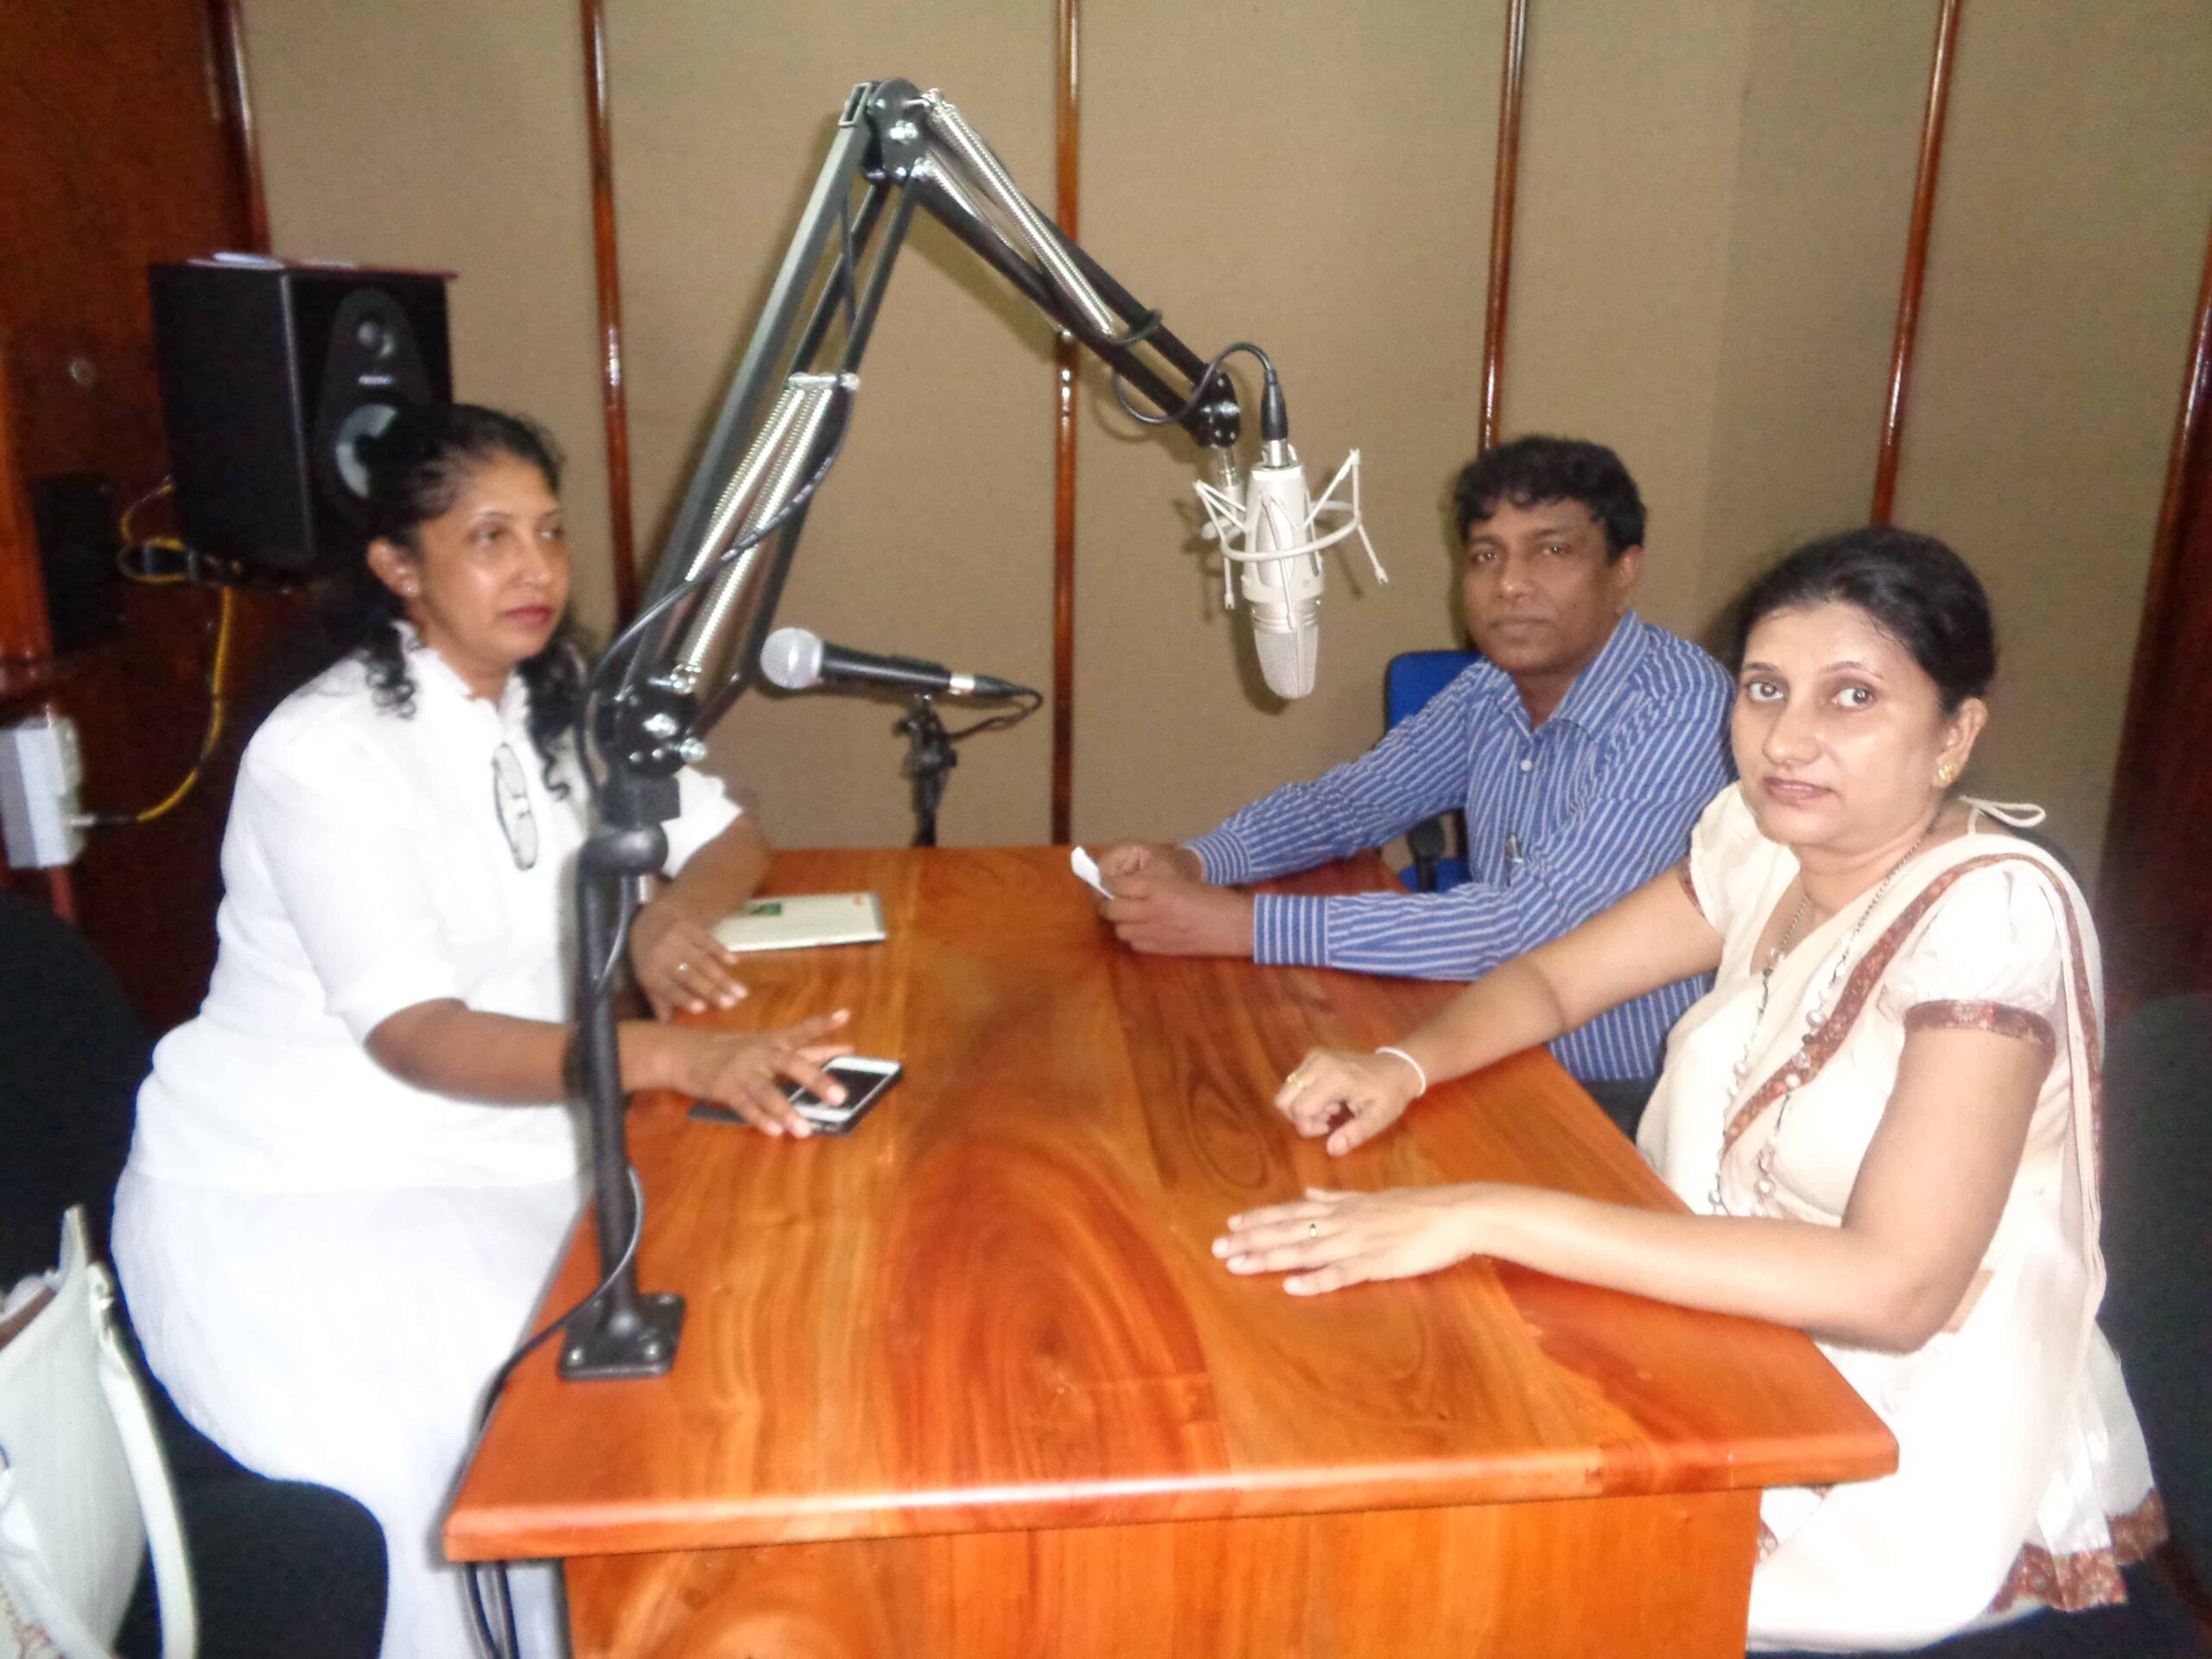 Manique and two other women in a radio studio